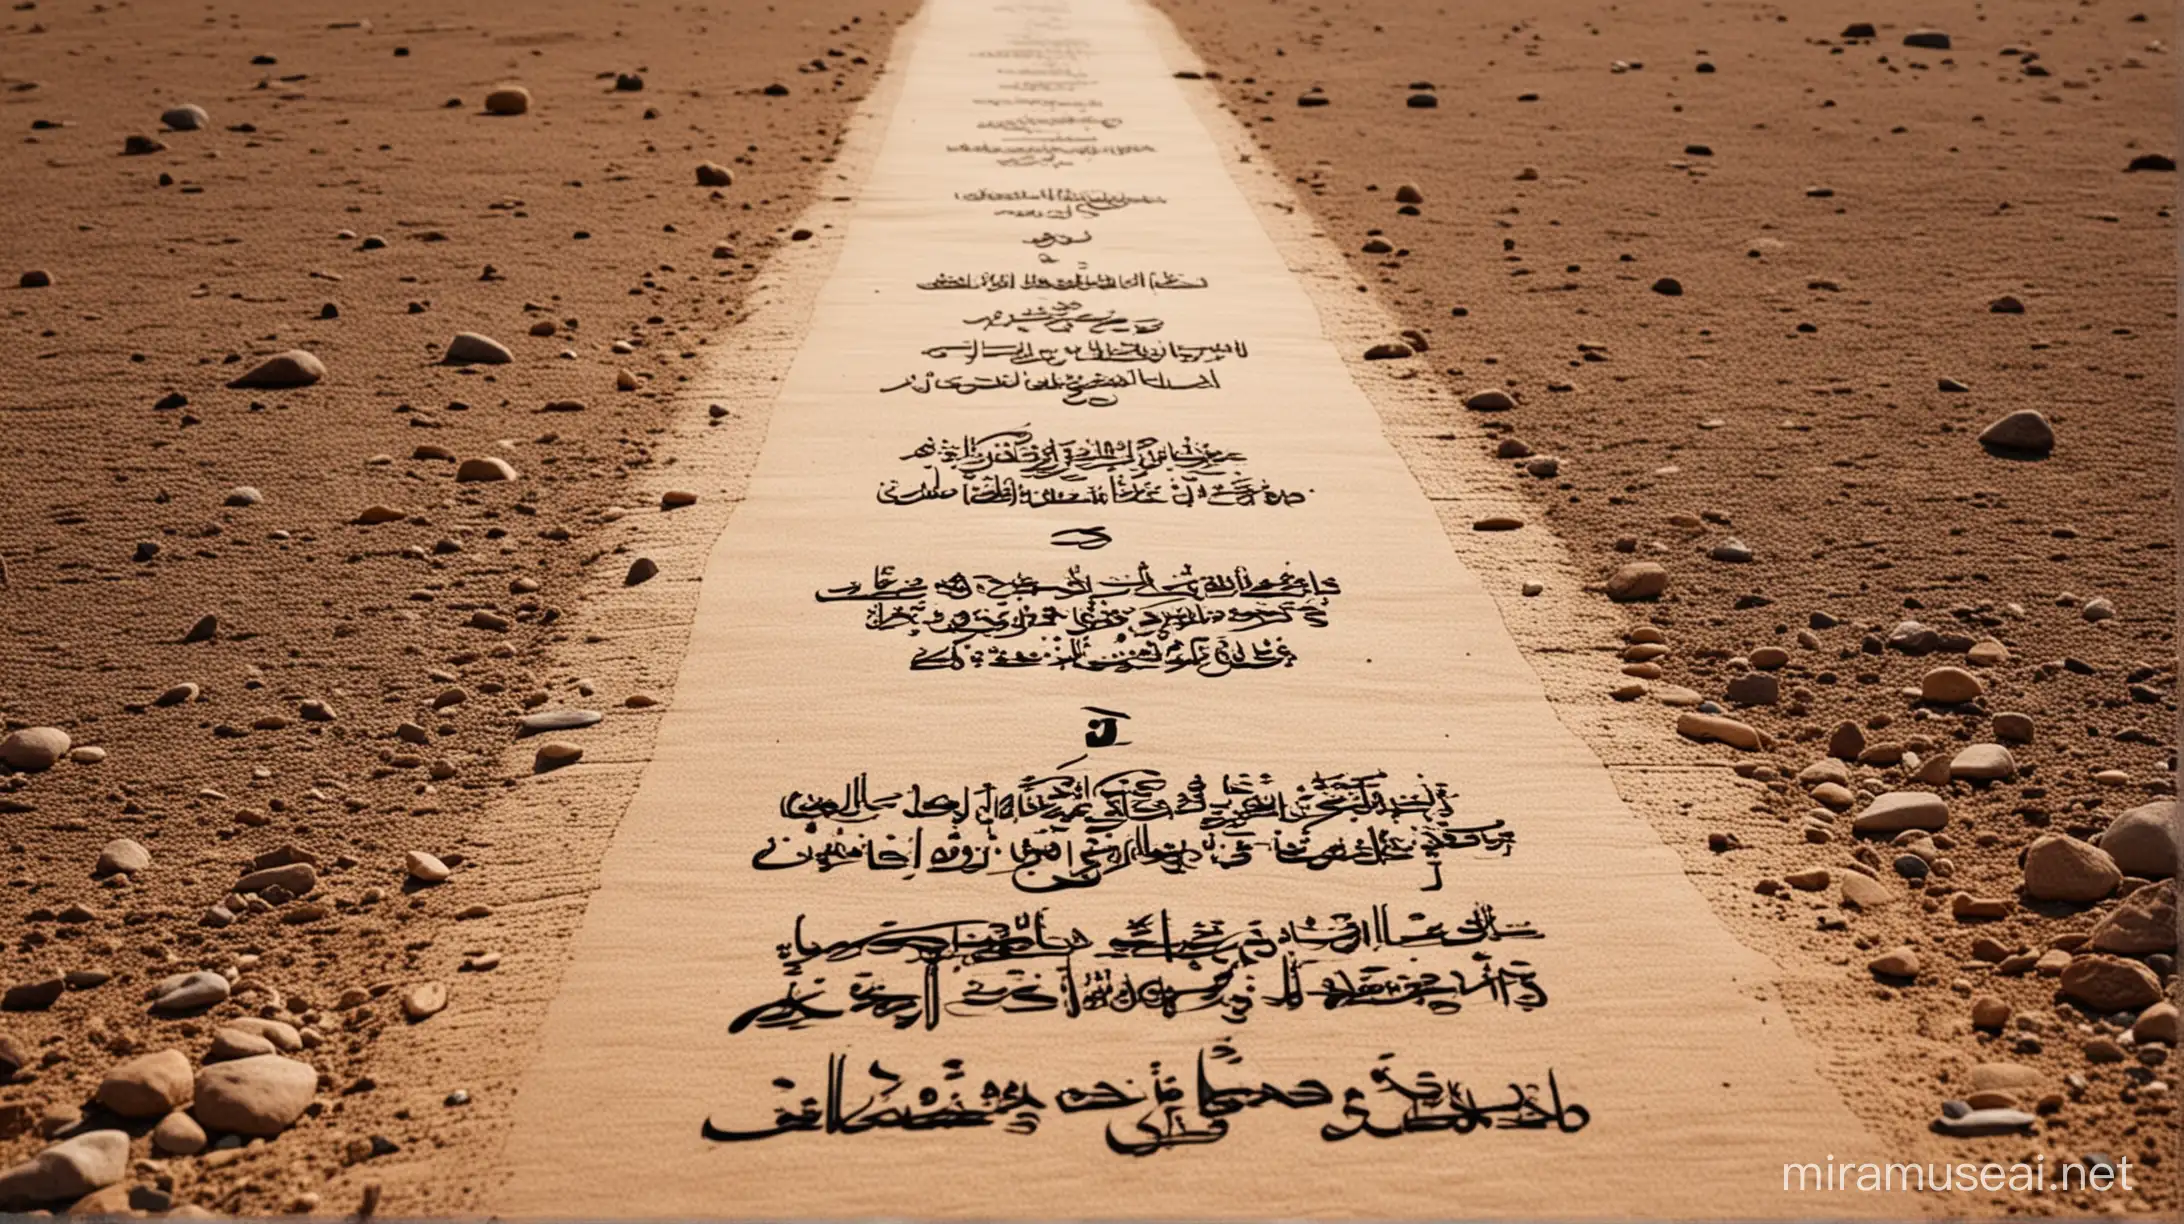 Inspirational Islamic Path Walking the Right Way in Life